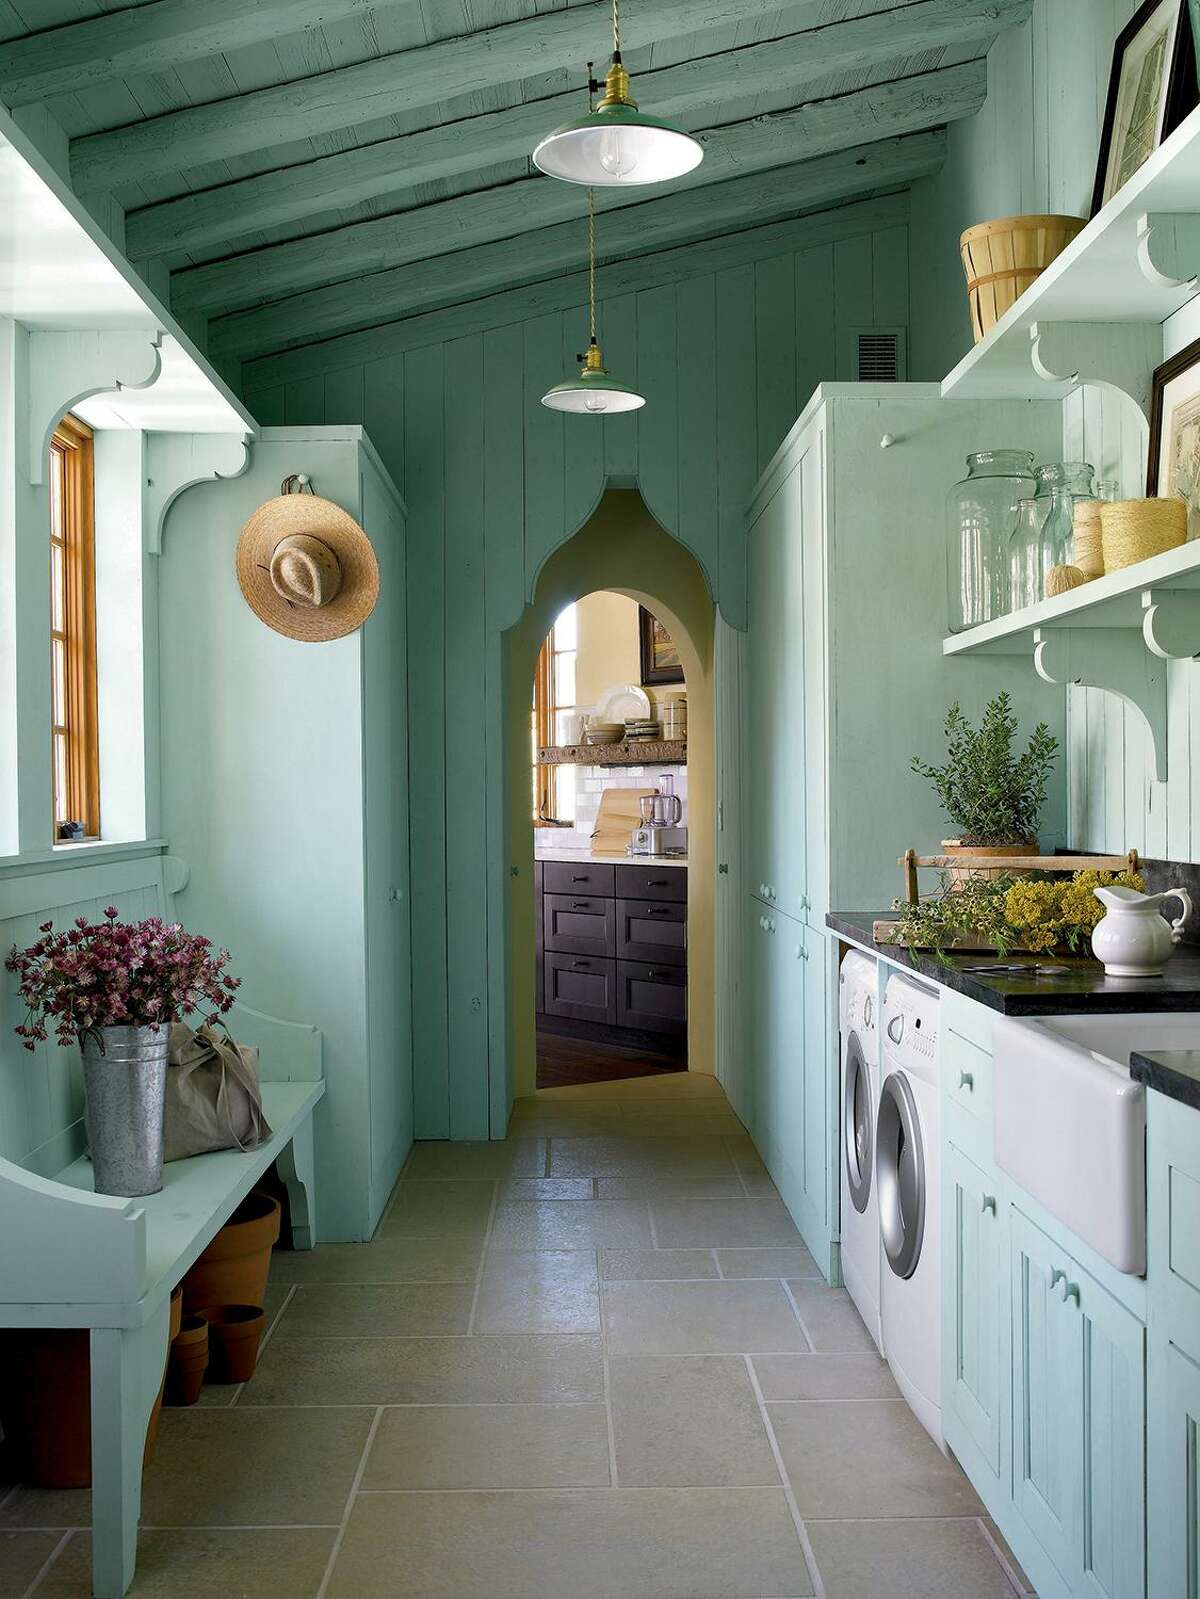 As an example of how laundry rooms are serving multiple purposes, this French farmhouse-style one doubles as a flower room for preparing bouquets and other floral arrangements.